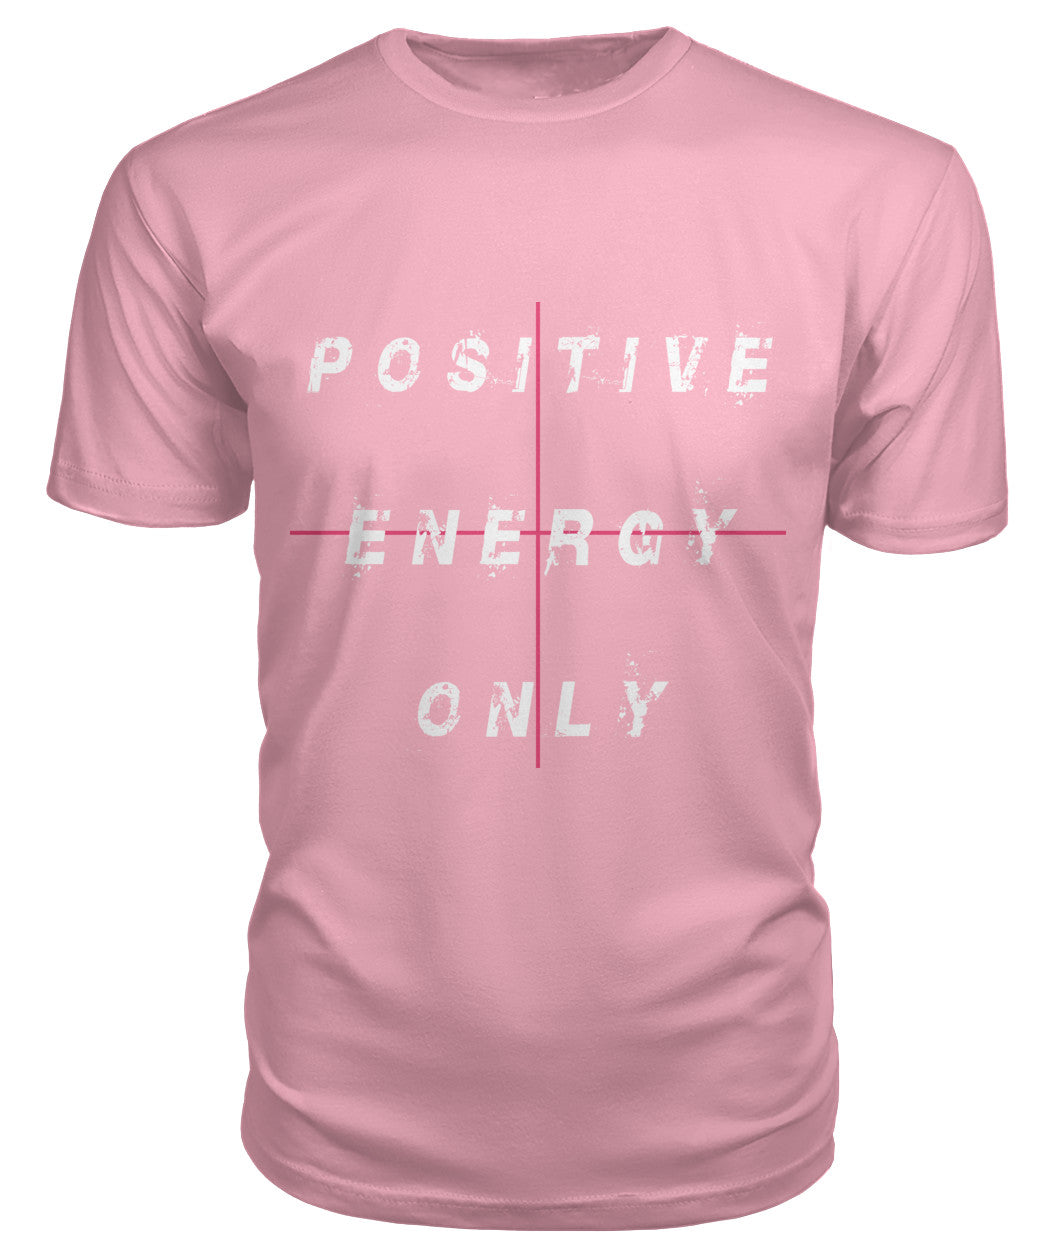 Positive Energy Only (T-Shirts)